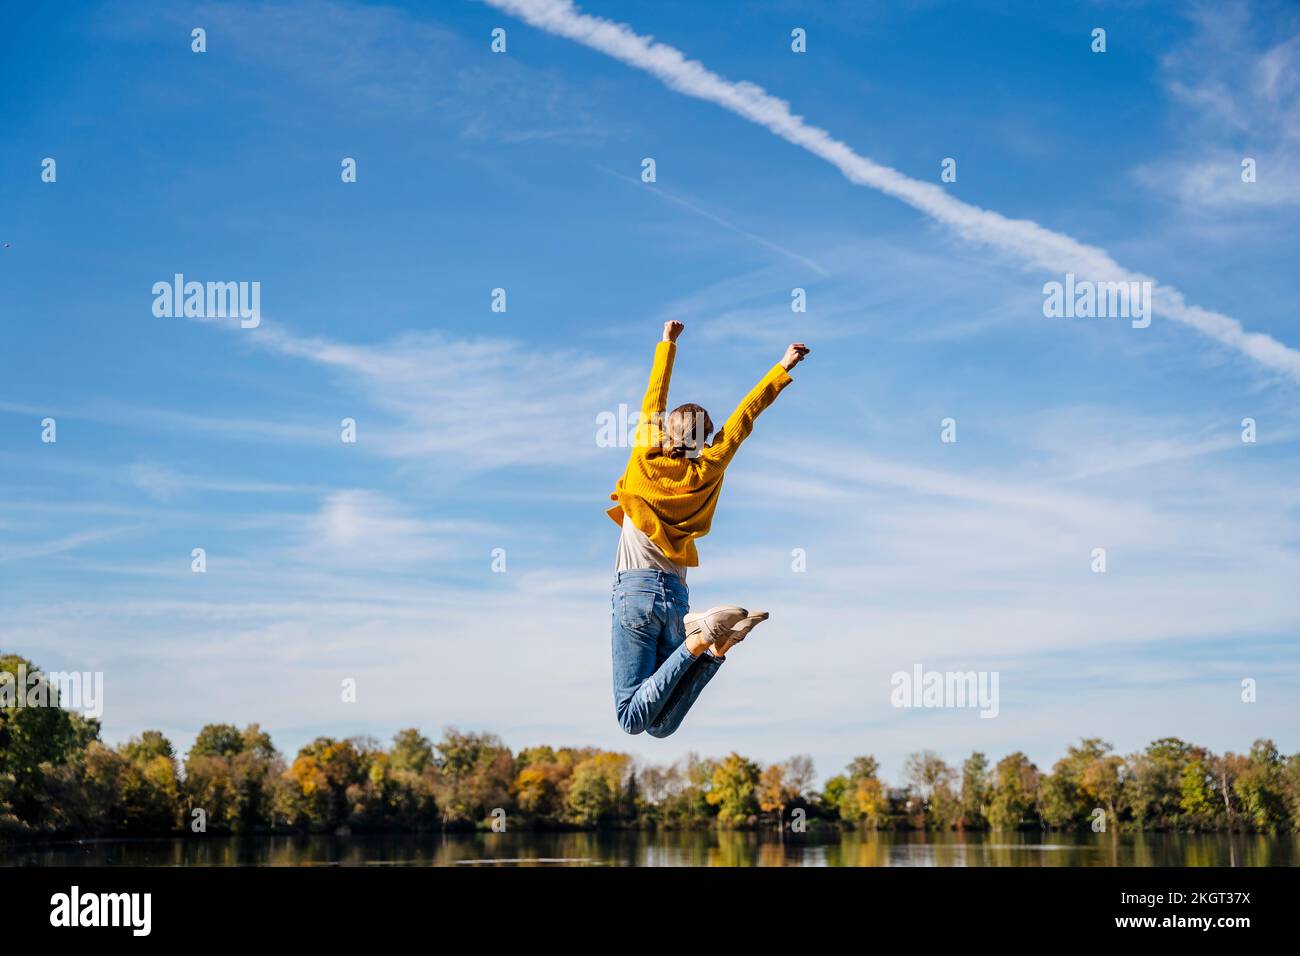 Woman with arms raised jumping under sky Stock Photo